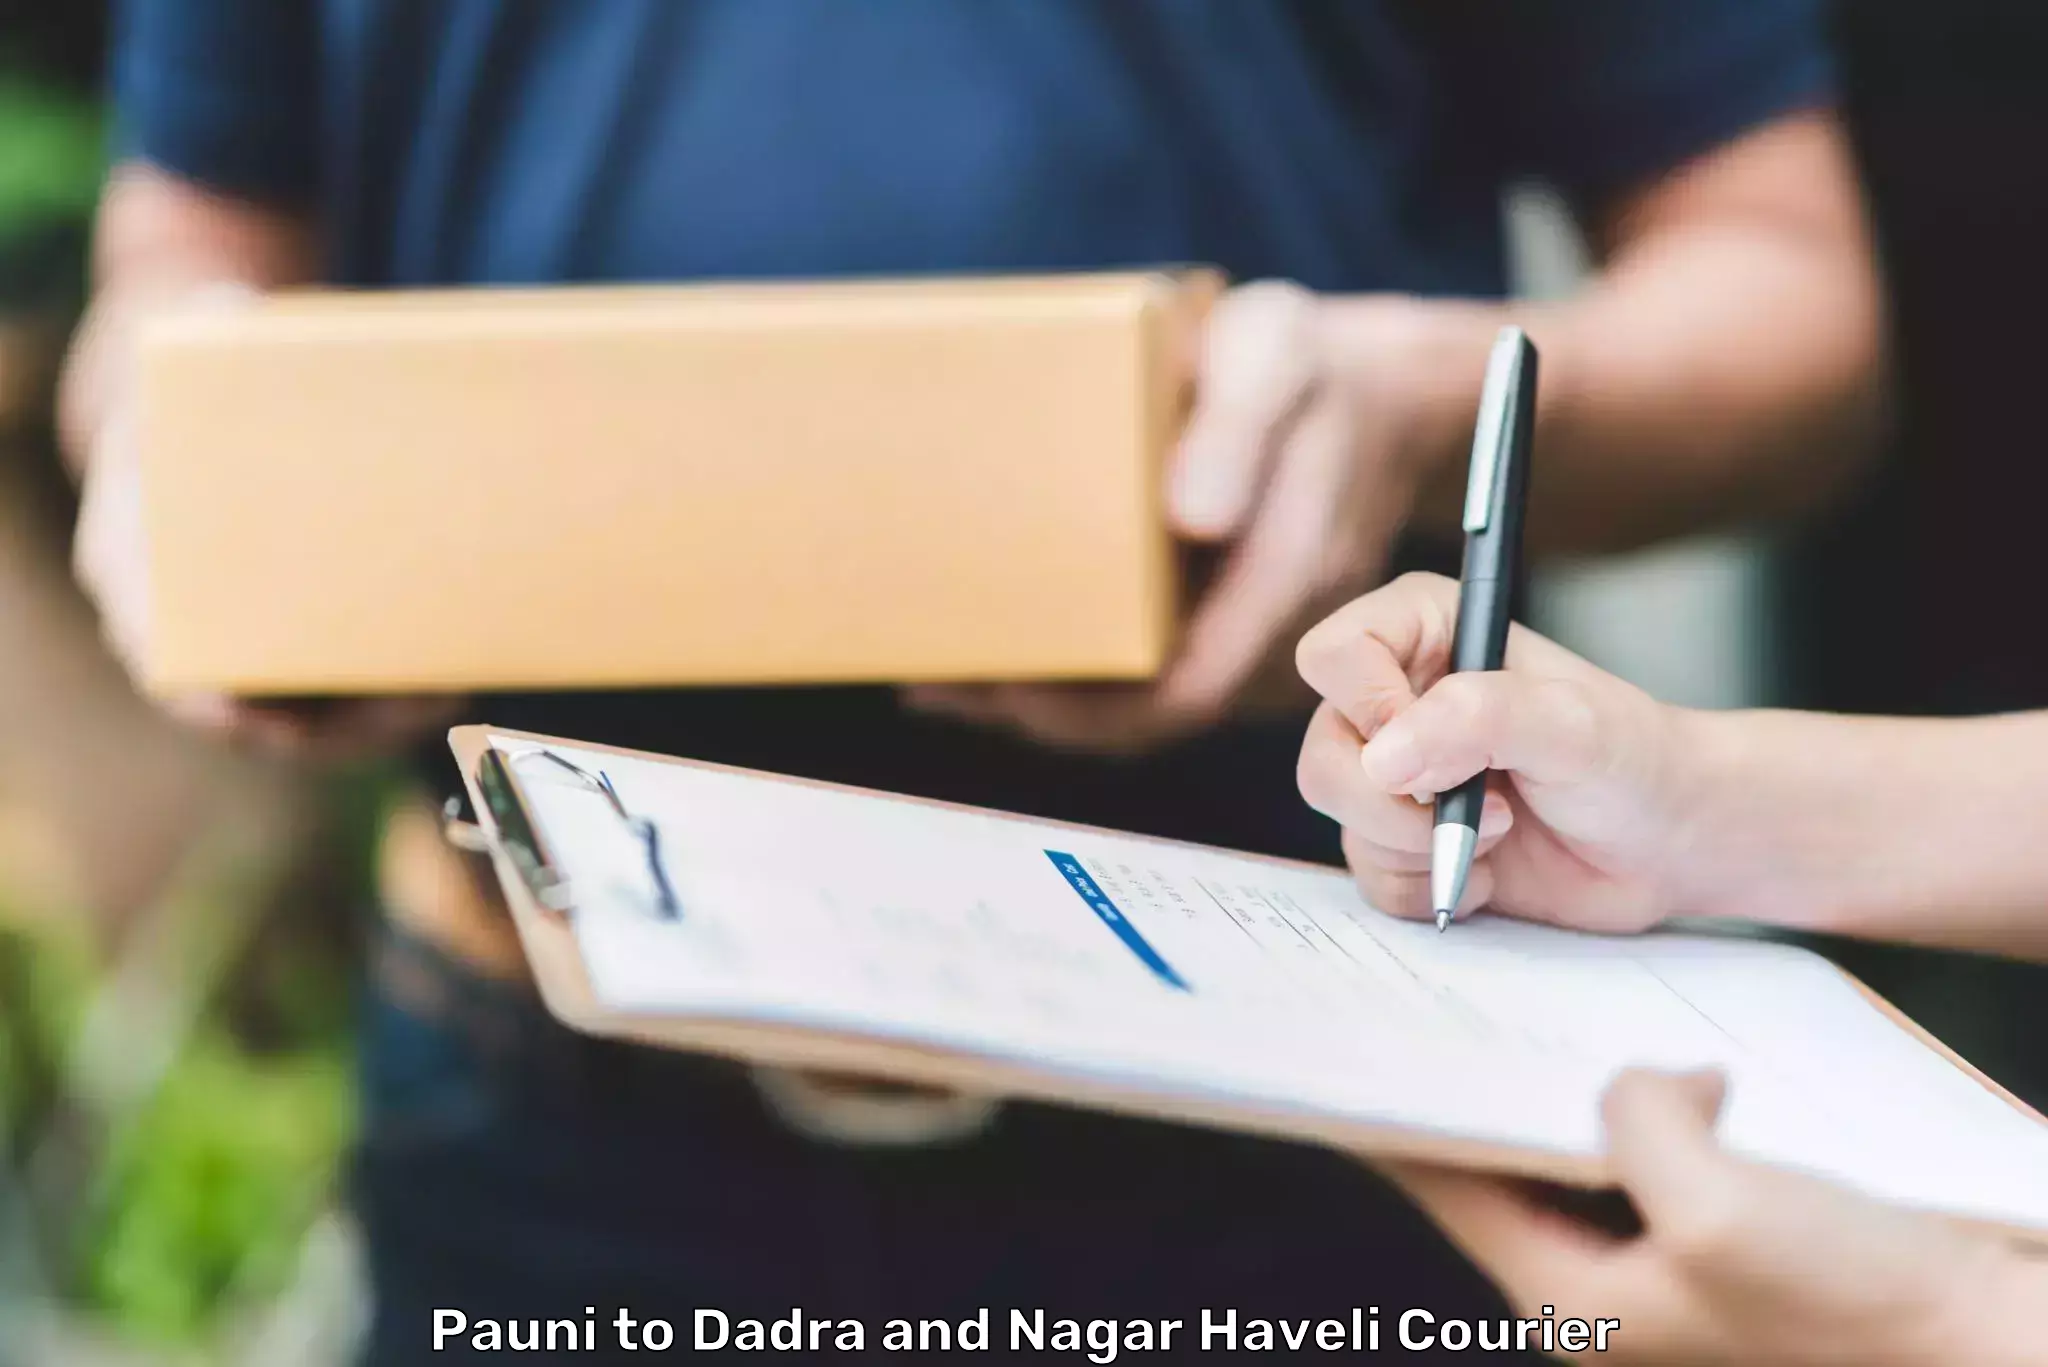 Courier services in Pauni to Dadra and Nagar Haveli